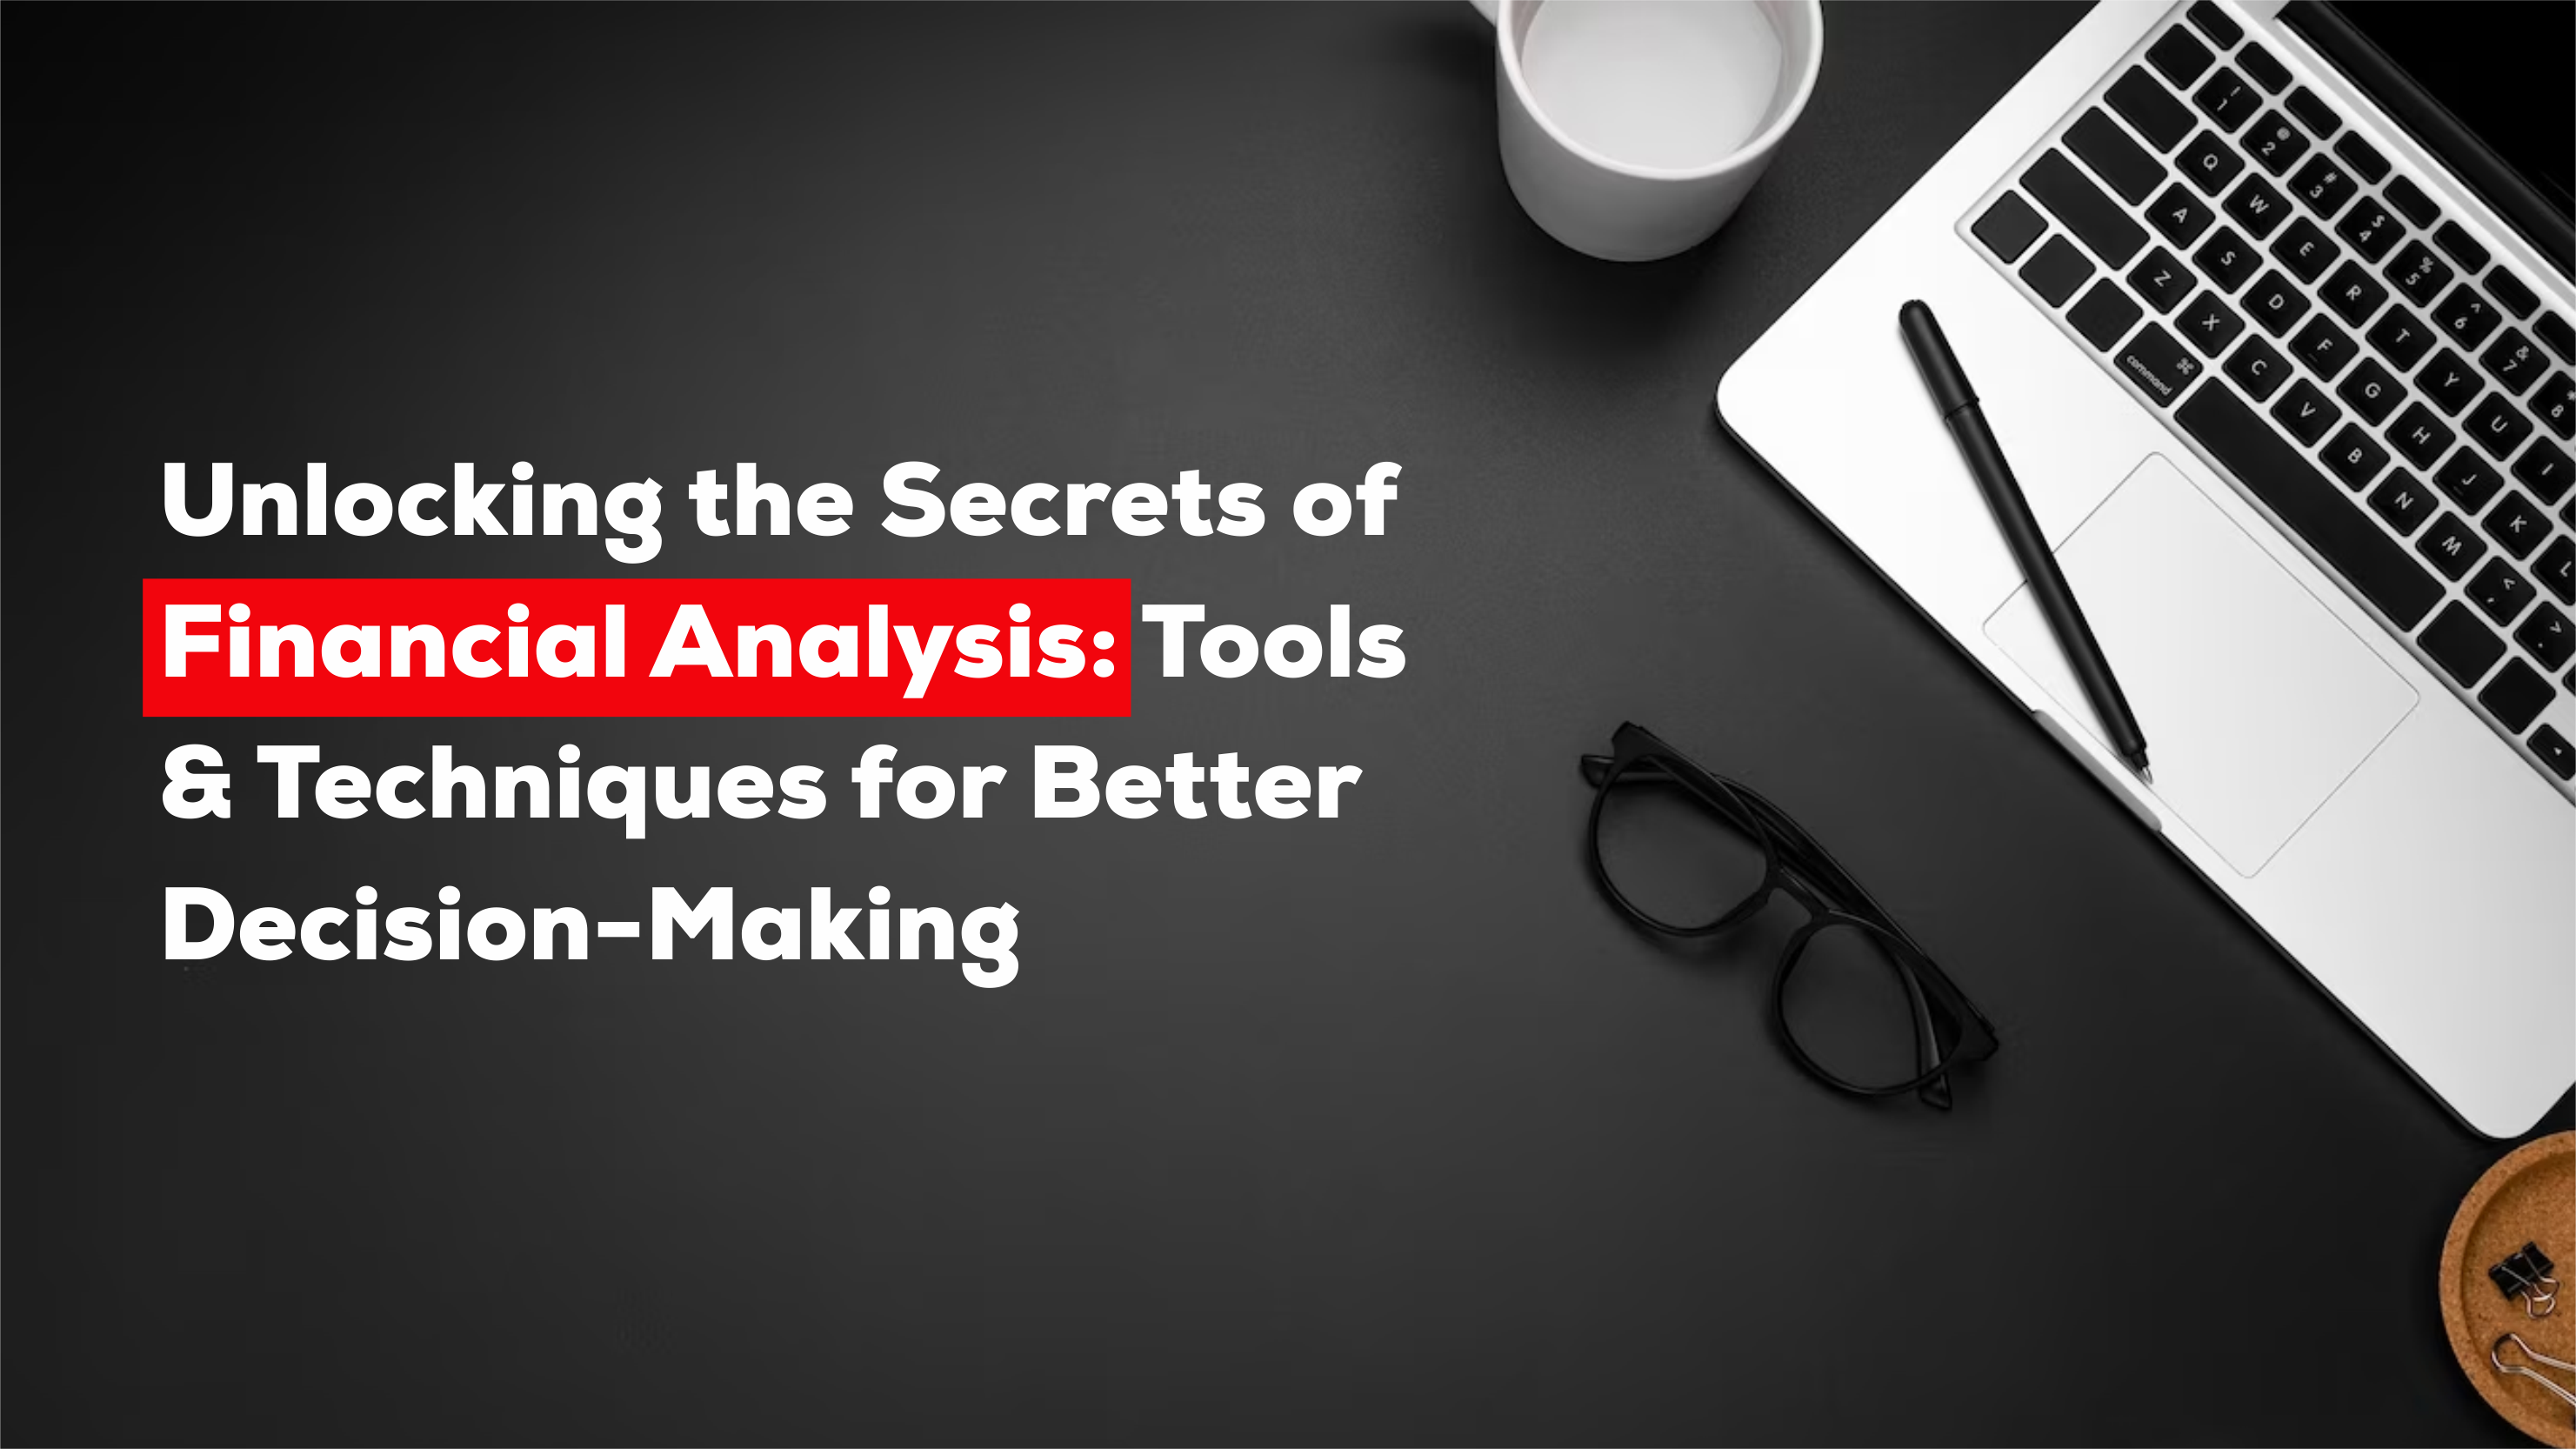 Unlocking the Secrets of Financial Analysis- Tools and Techniques for Better Decision Making